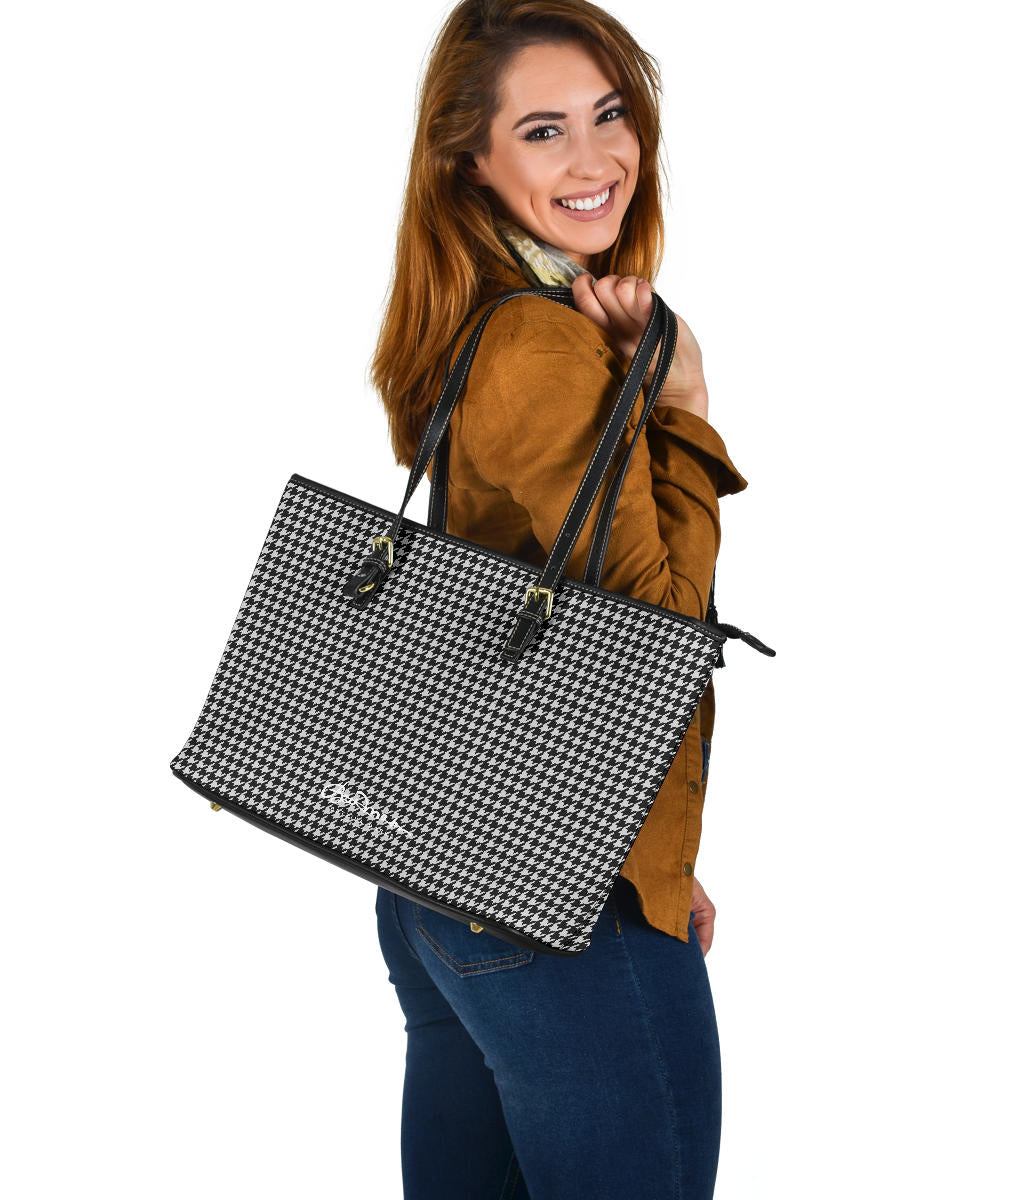 B&W Houndstooth Large Tote Bag